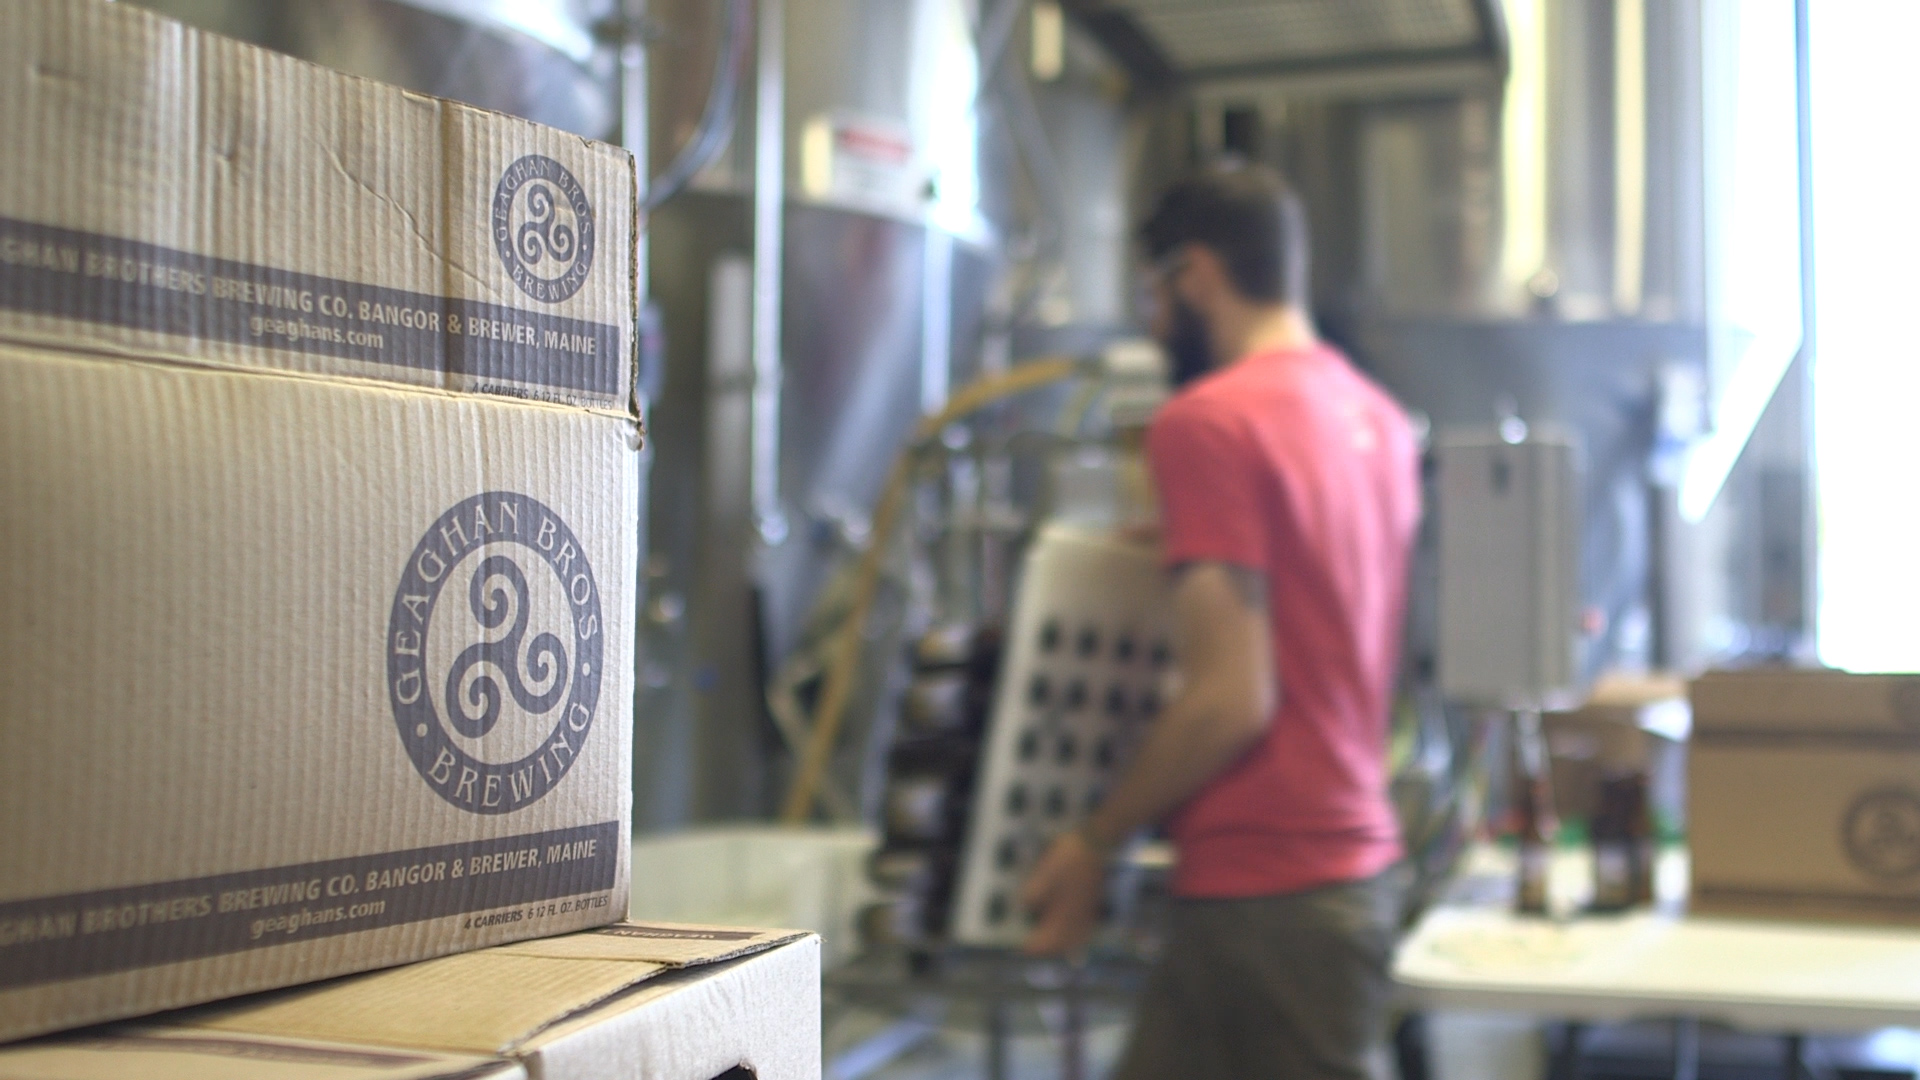 According to an economic impact study from the Maine Brewers’ Guild, the Maine brewing industry employed 1,632 people directly, and helped support the creation of 545 additional jobs.